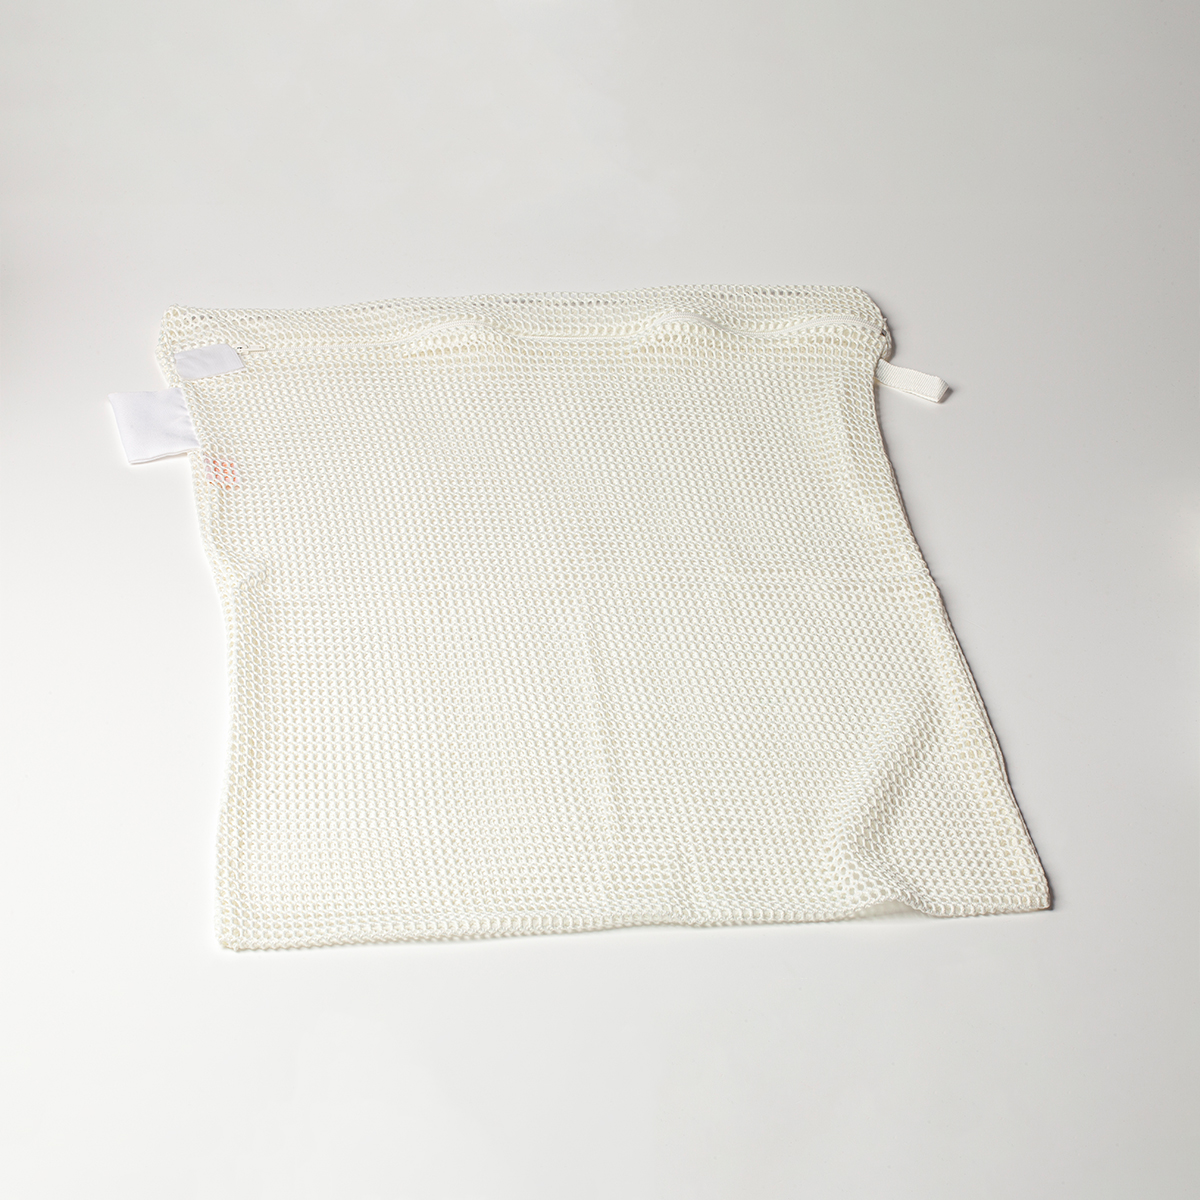 Image of Laundry Bag Mesh White - 40x60cm with loop